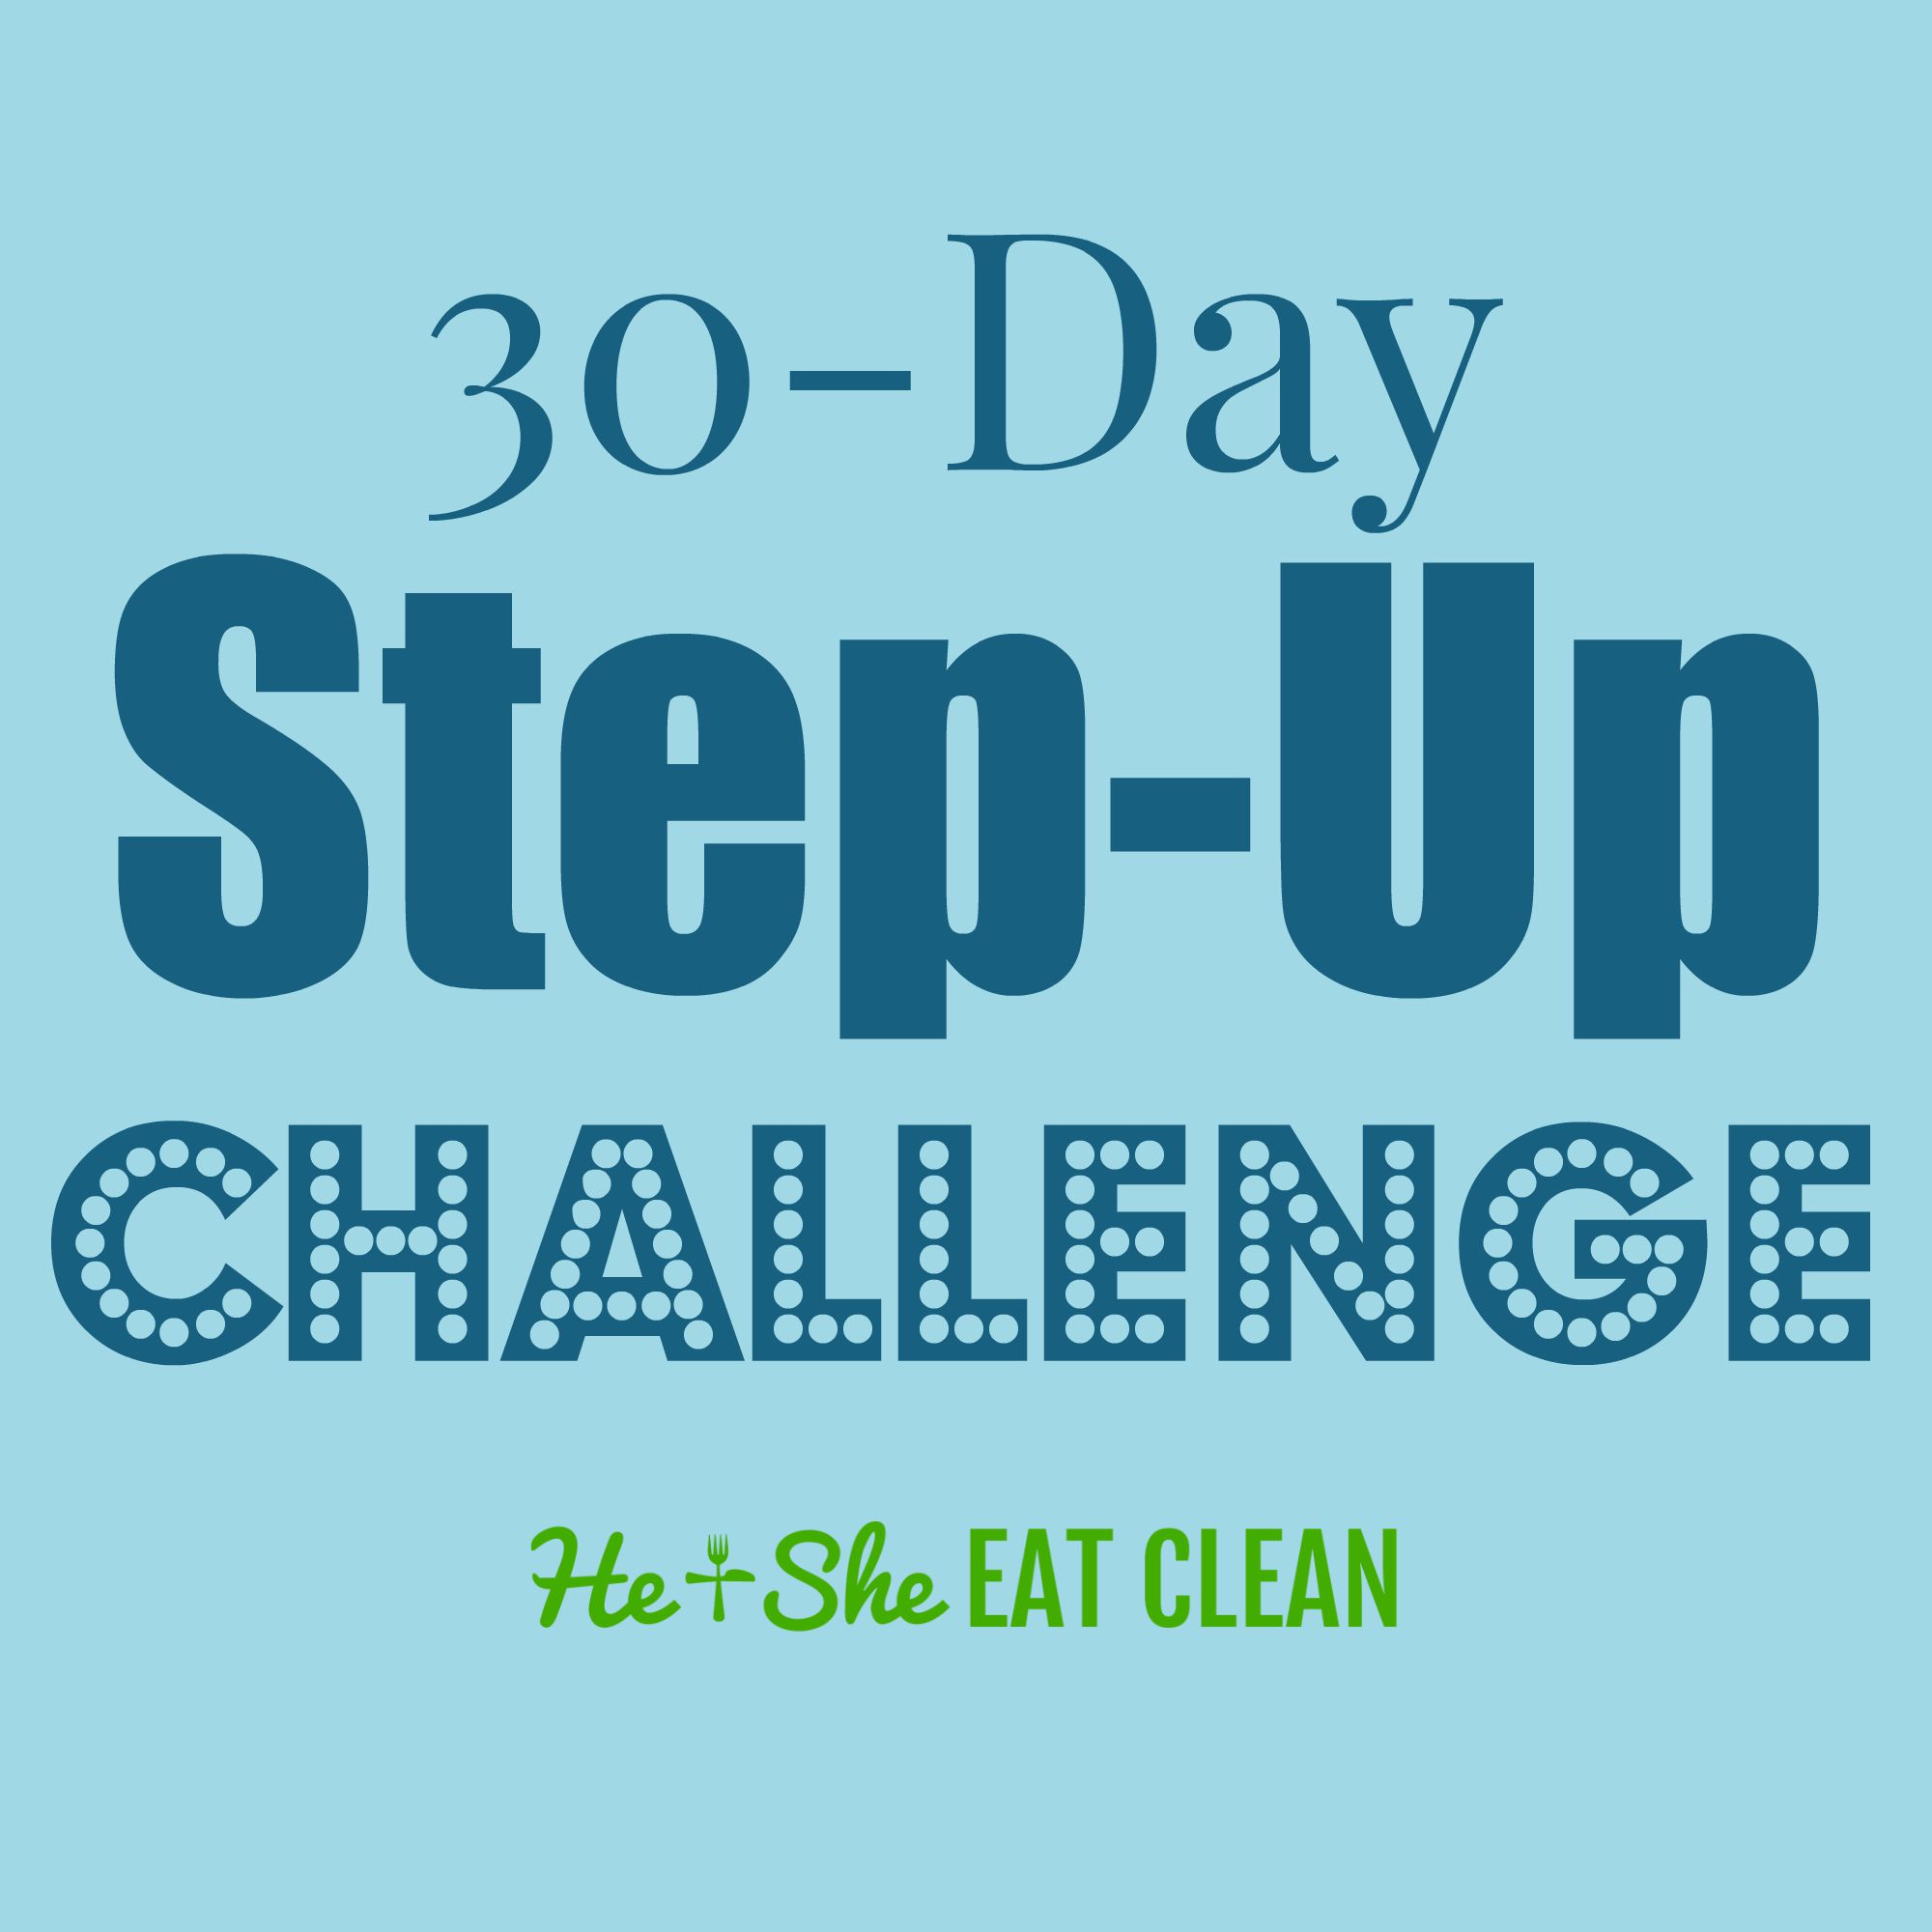 Live A Better Life in 30 Days Challenge (Sep 2010 Run) [Sign Ups Closed] -  Personal Excellence